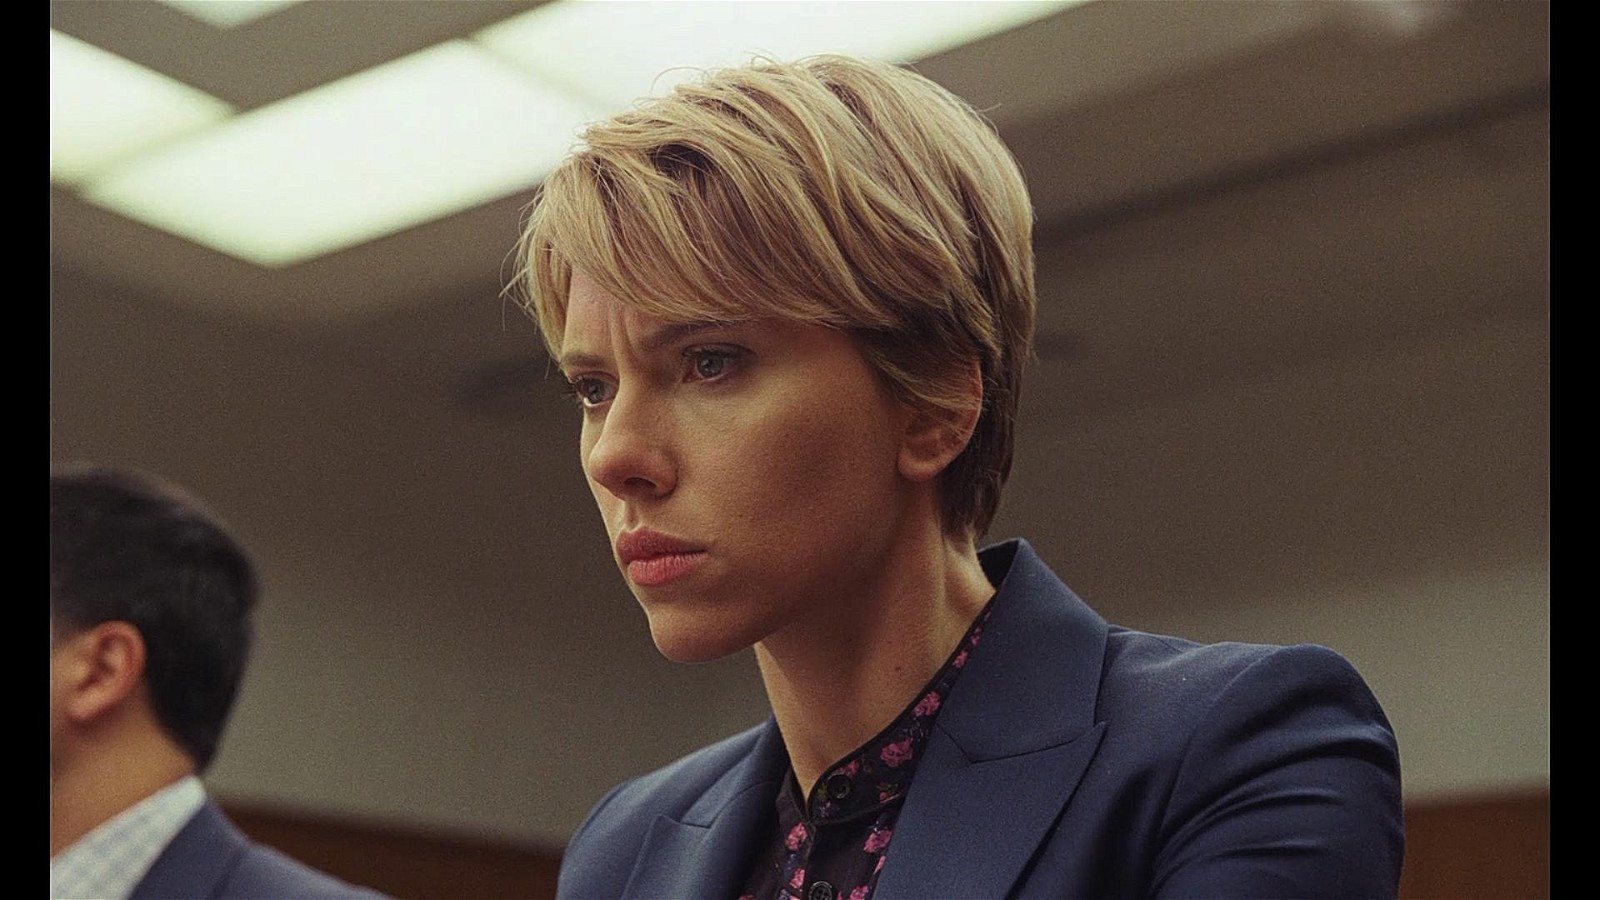 Scarlett Johansson's identity was exploited by Deepfake technology to promote a firm